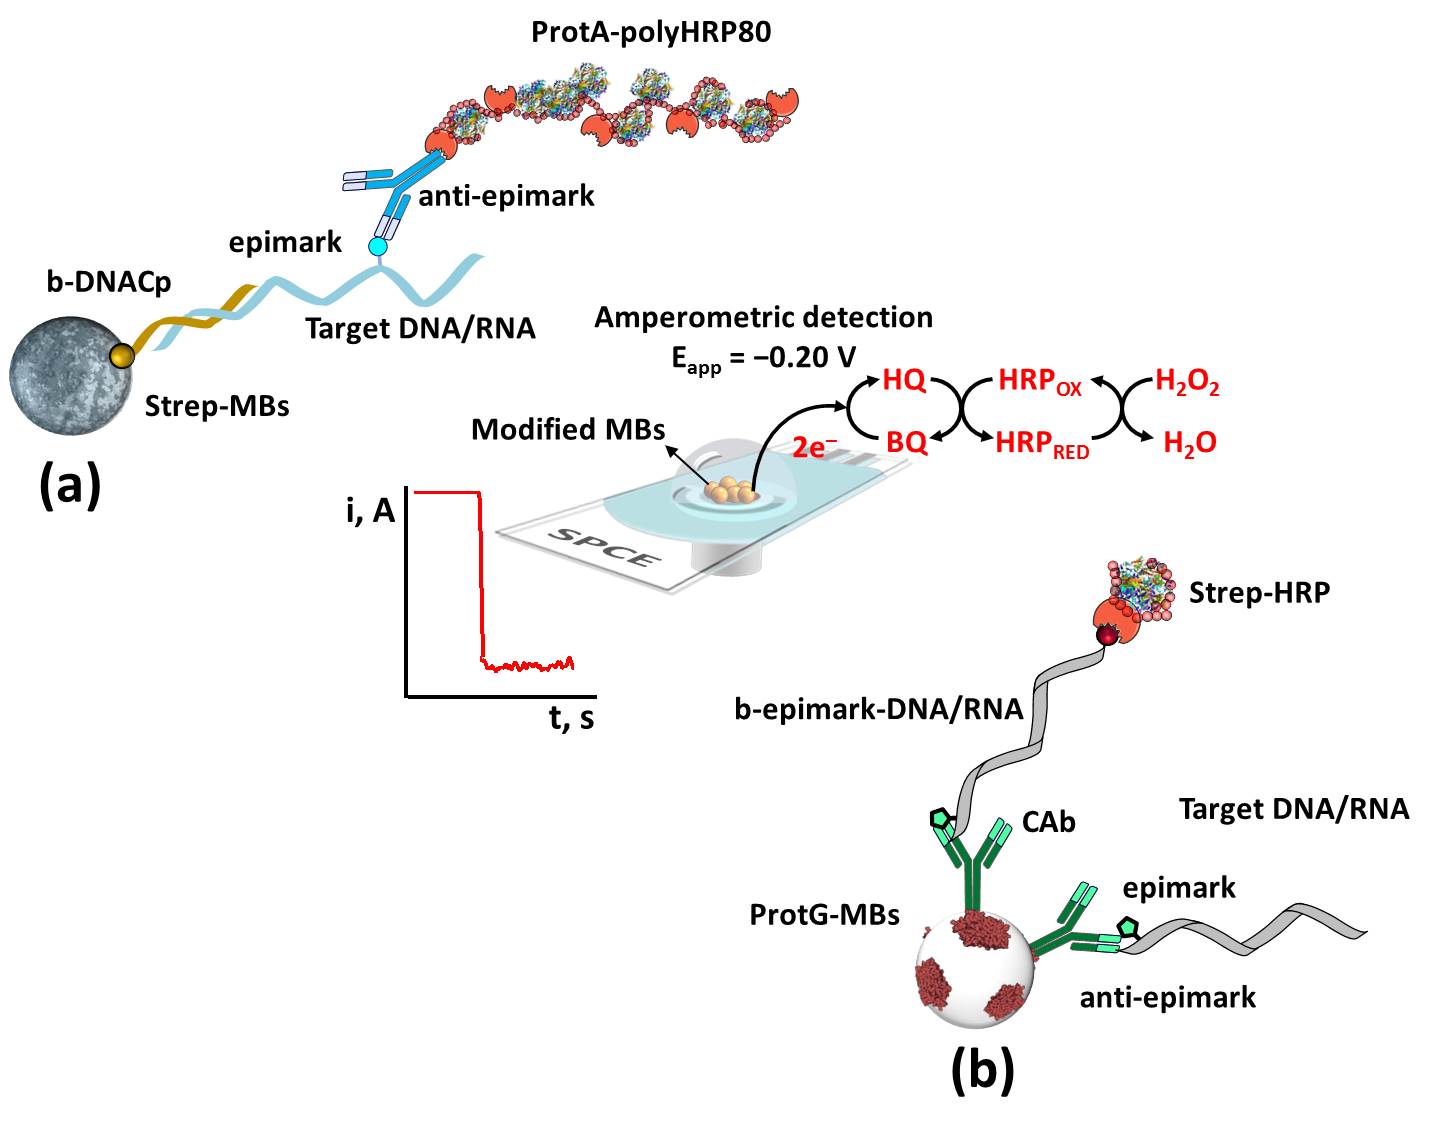 Figure 1. Schematic diagram of the biosensing platforms developed for the determination of methylations in nucleic acids at regional (a) and global (b) levels.